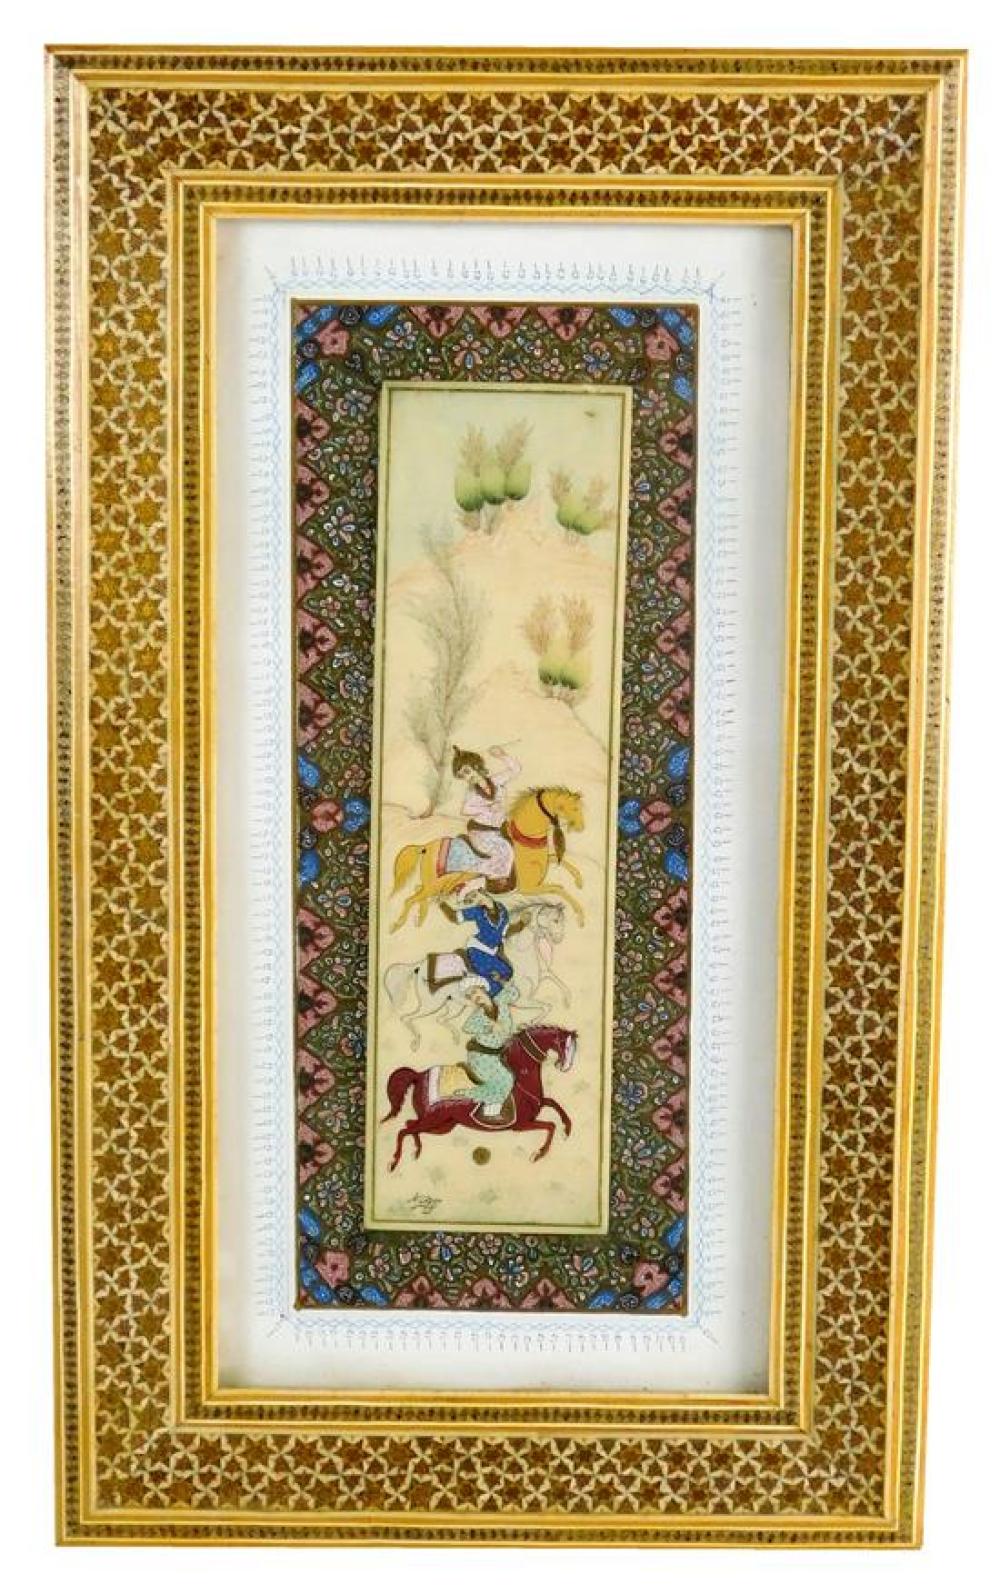 PERSIAN MINIATURE PAINTING ON IVORY 31dbe1